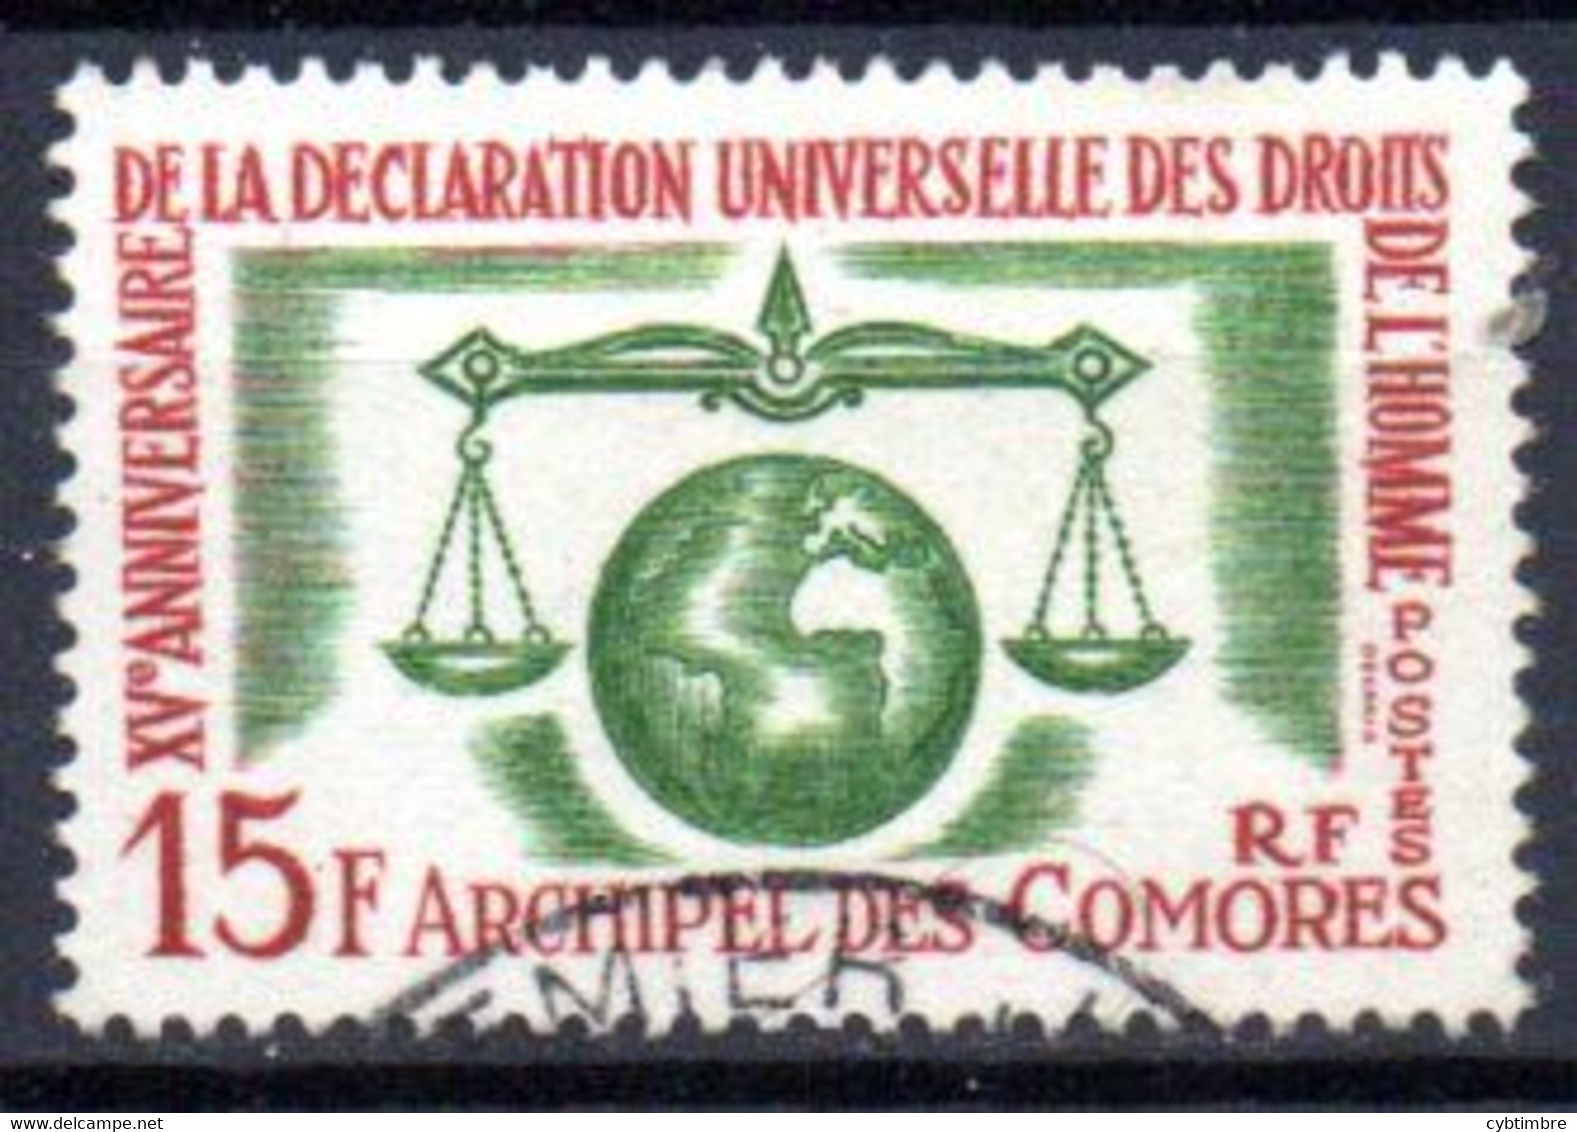 Comores: Yvert N° 28 - Used Stamps